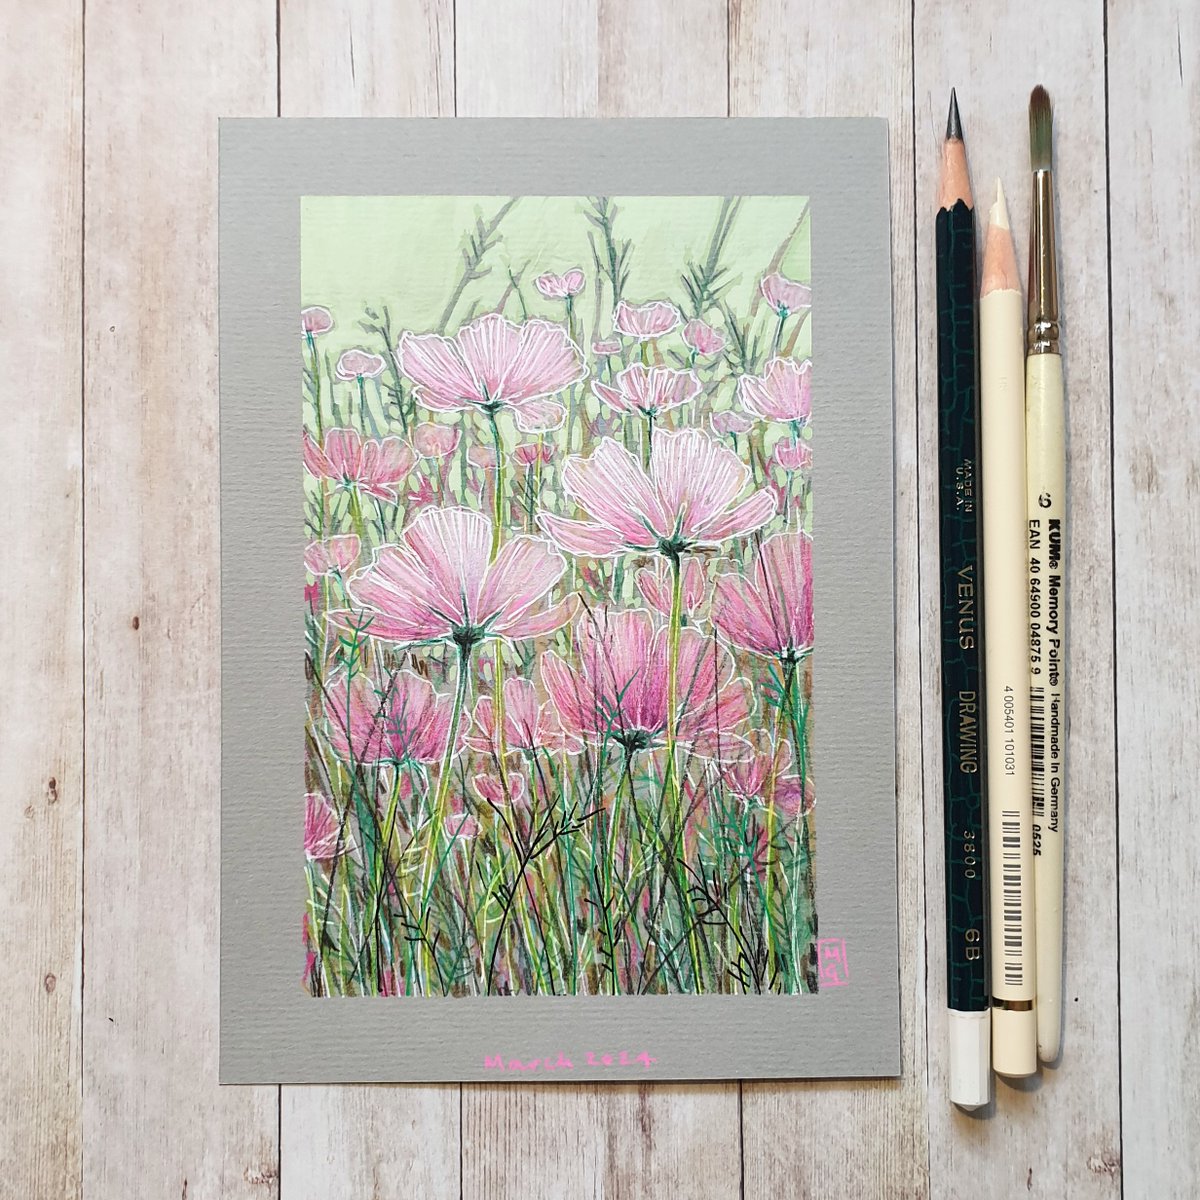 Fresh and light, a bed of pink cosmos flowers.  This little original floral artwork is available in my art shop, I'd love you to visit...
theweeowlart.etsy.com/listing/169112…
#OriginalArt #drawing #PenAndInk #ColourPencil 
#painting #artwork #art #TraditionalArt 
#FloralLandscape #Flowers